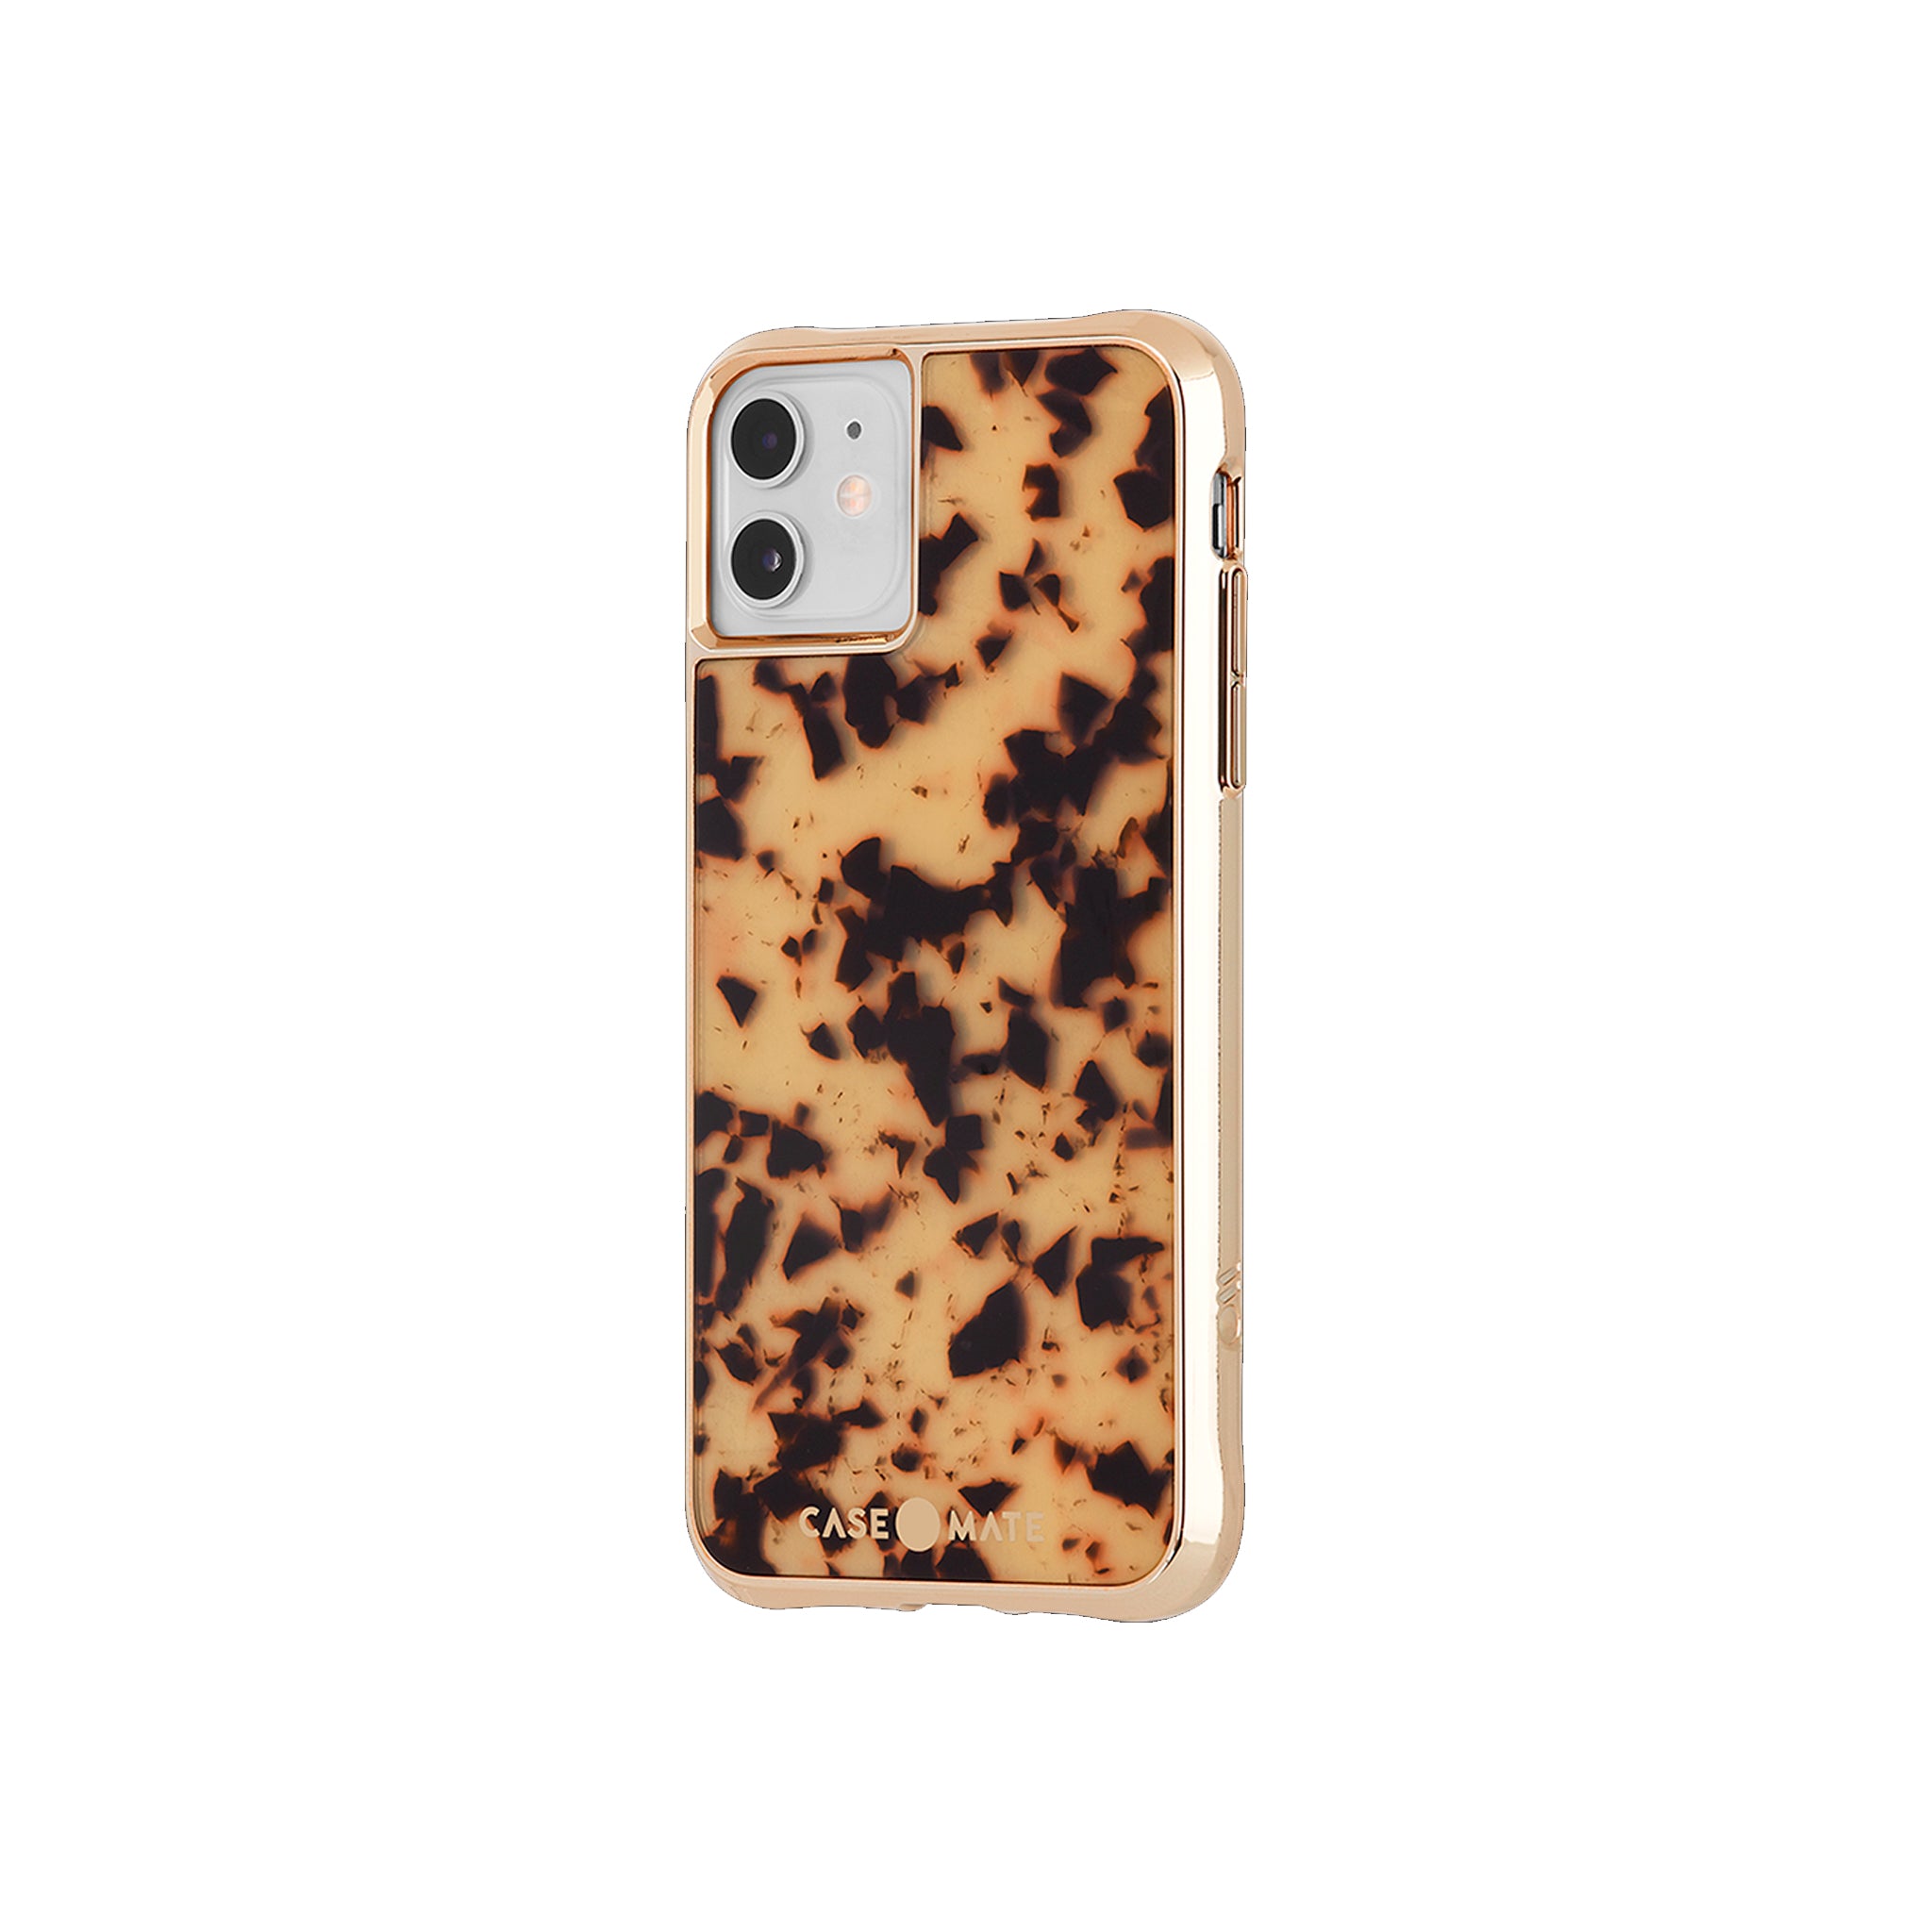 Case-mate - Acetate Case For Apple iPhone 11 / Xr - Tortise Shell